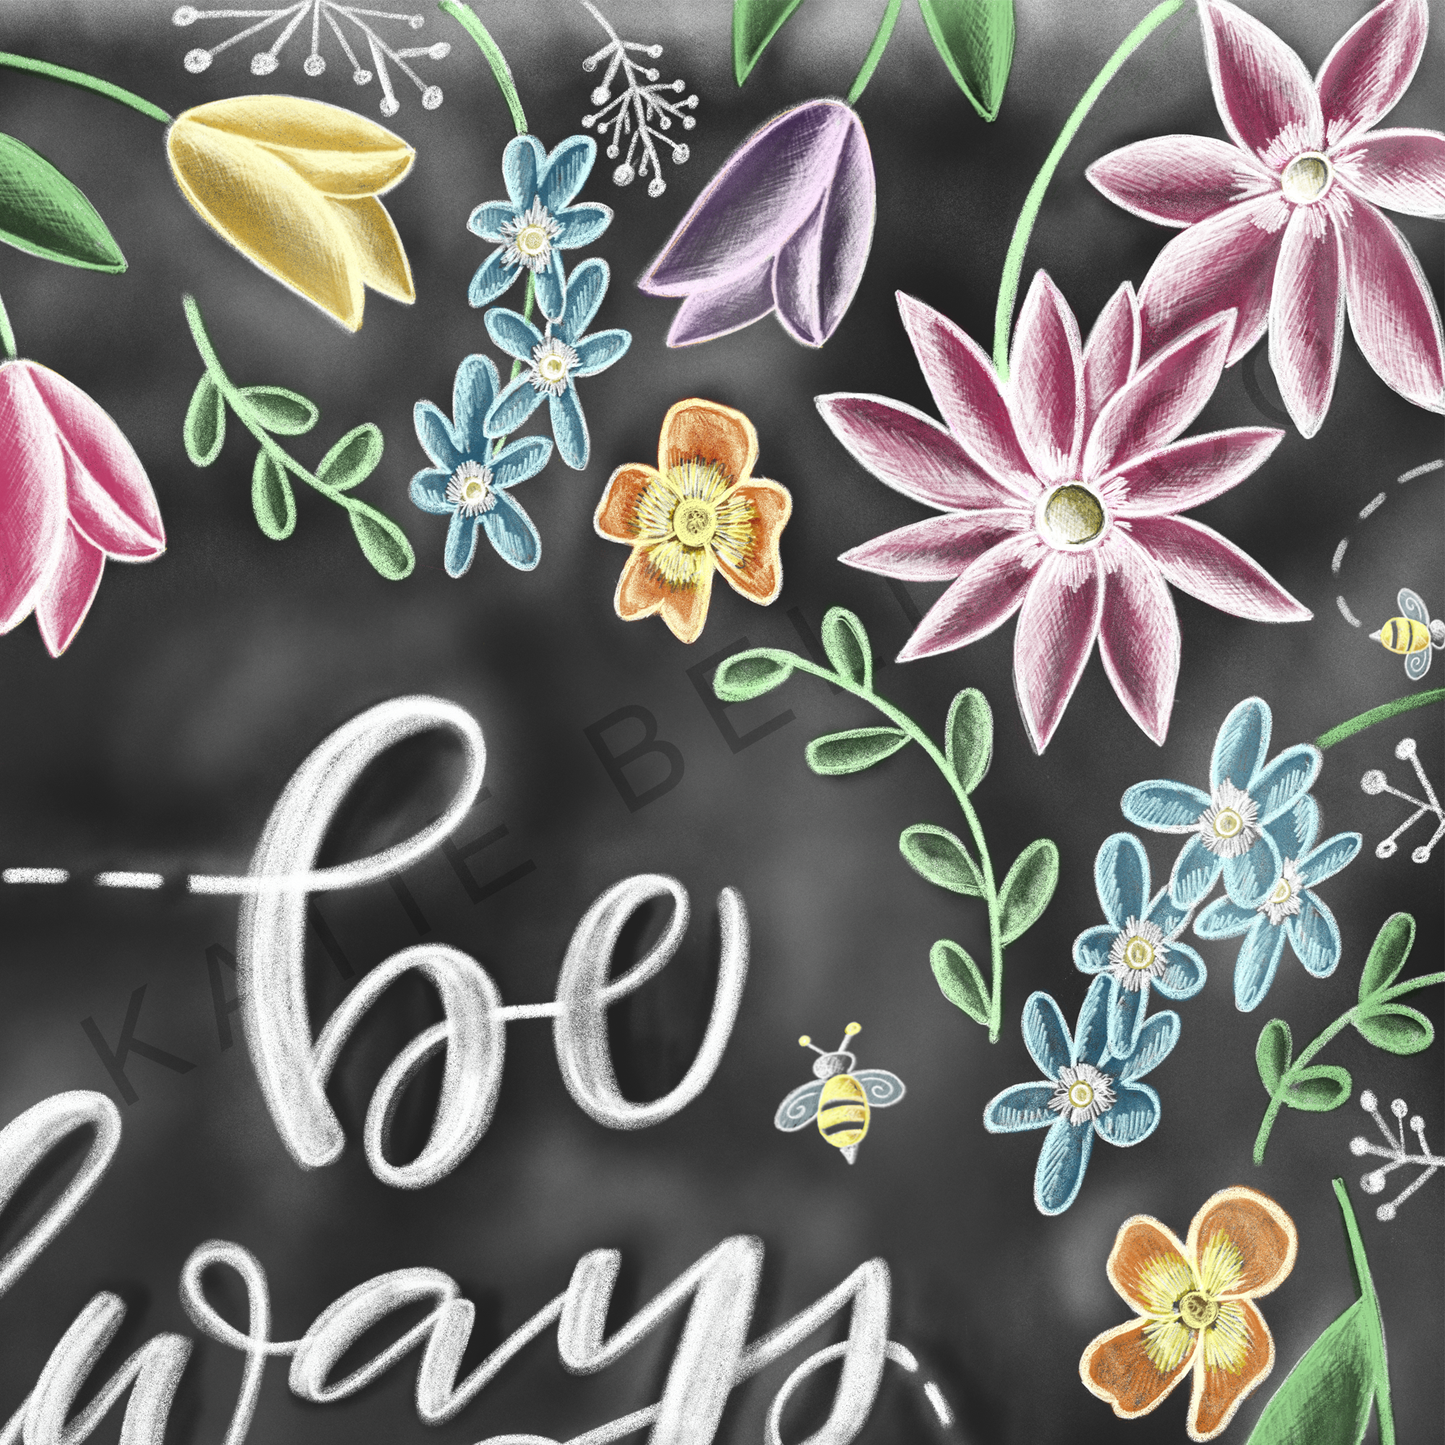 Be always blooming. Chalkboard print. Chalk Art. Bright spring flowers. Bees buzzing. Inspirational art. Spring Decor. Easter Decor. Easter gift. Spring Artwork. Hand drawn illustration. flowers surrounding text. Katie Belle Co. 